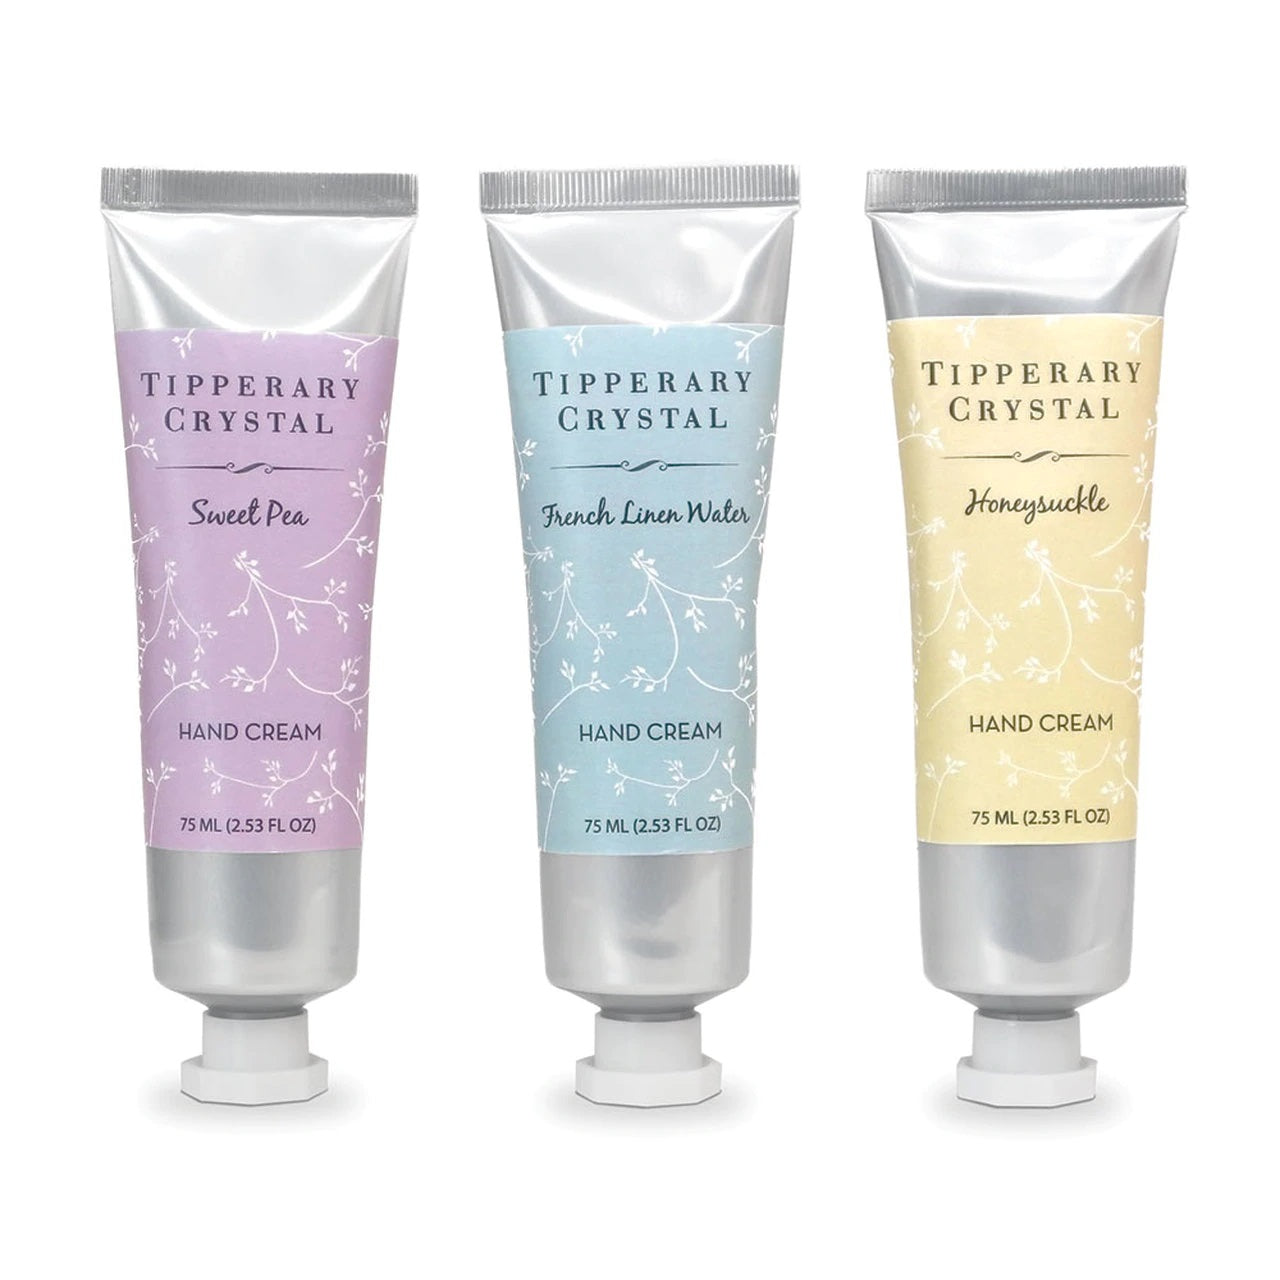 Tipperary Crystal Hand Cream Trio: Honeysuckle, Sweet Pea & French Linen.  Indulge your hands with these fresh floral fragrances of Honeysuckle, Sweet Pea & French Linen. These relaxing floral fragrance fusion will leave your hands feeling moisturised and soft.